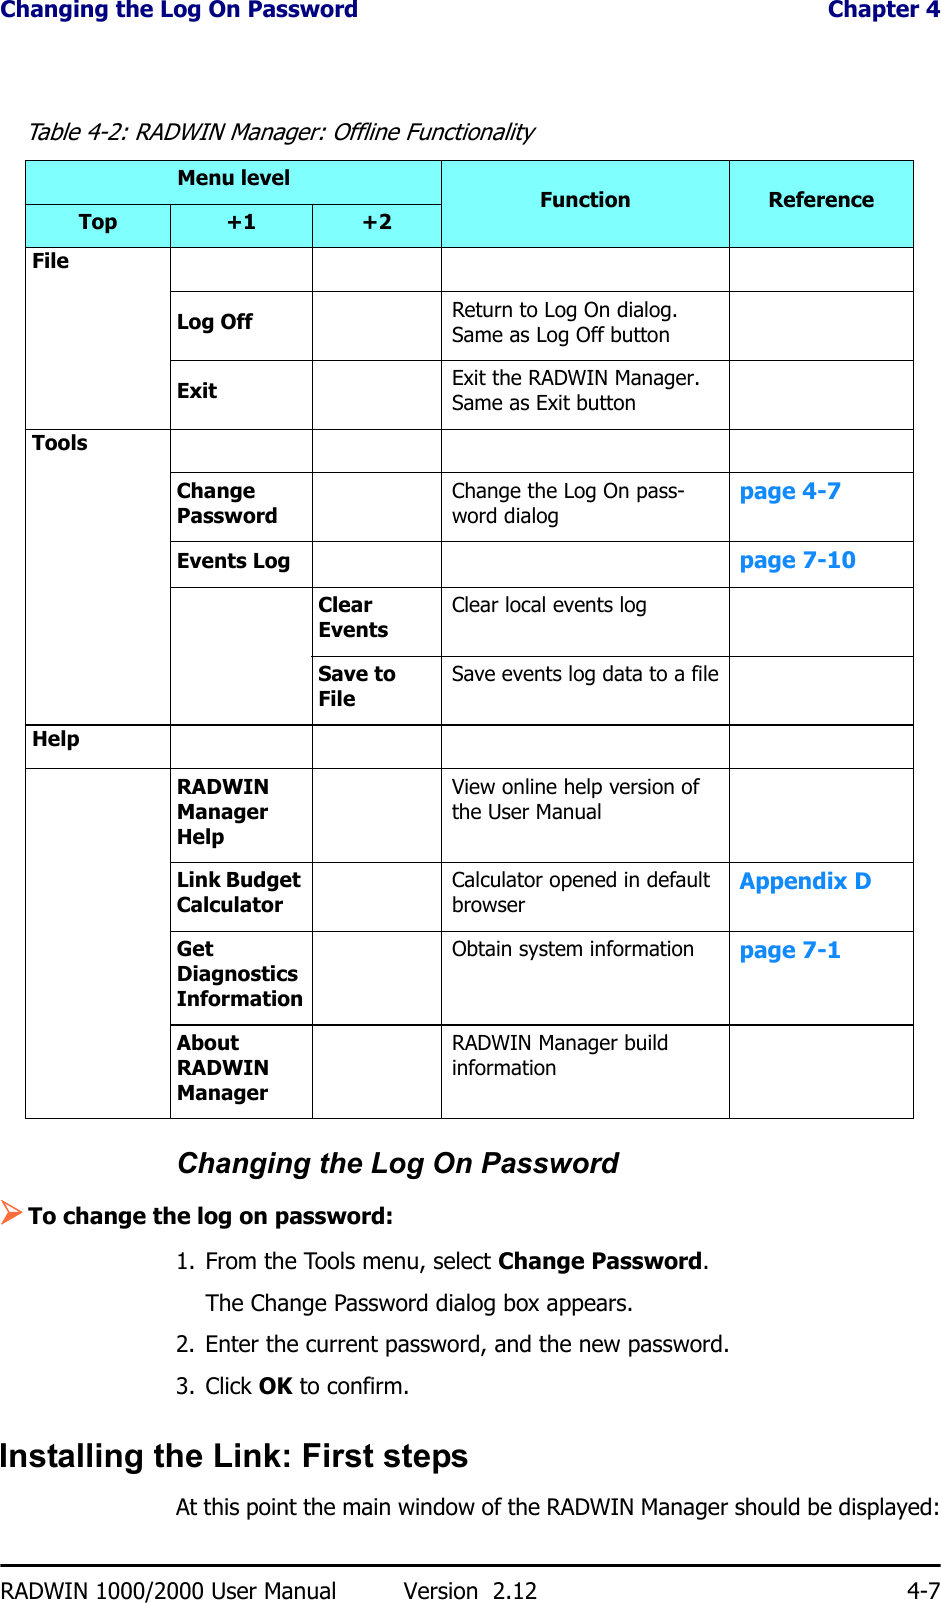 Changing the Log On Password  Chapter 4RADWIN 1000/2000 User Manual Version  2.12 4-7Changing the Log On Password¾To change the log on password:1. From the Tools menu, select Change Password.The Change Password dialog box appears.2. Enter the current password, and the new password.3. Click OK to confirm.Installing the Link: First stepsAt this point the main window of the RADWIN Manager should be displayed:Table 4-2: RADWIN Manager: Offline FunctionalityMenu levelFunction ReferenceTop +1 +2FileLog Off Return to Log On dialog. Same as Log Off buttonExit Exit the RADWIN Manager. Same as Exit buttonToolsChange PasswordChange the Log On pass-word dialog page 4-7Events Log page 7-10Clear EventsClear local events logSave to FileSave events log data to a fileHelpRADWIN Manager HelpView online help version of the User ManualLink Budget CalculatorCalculator opened in default browser Appendix DGet Diagnostics InformationObtain system information page 7-1About RADWIN ManagerRADWIN Manager build information